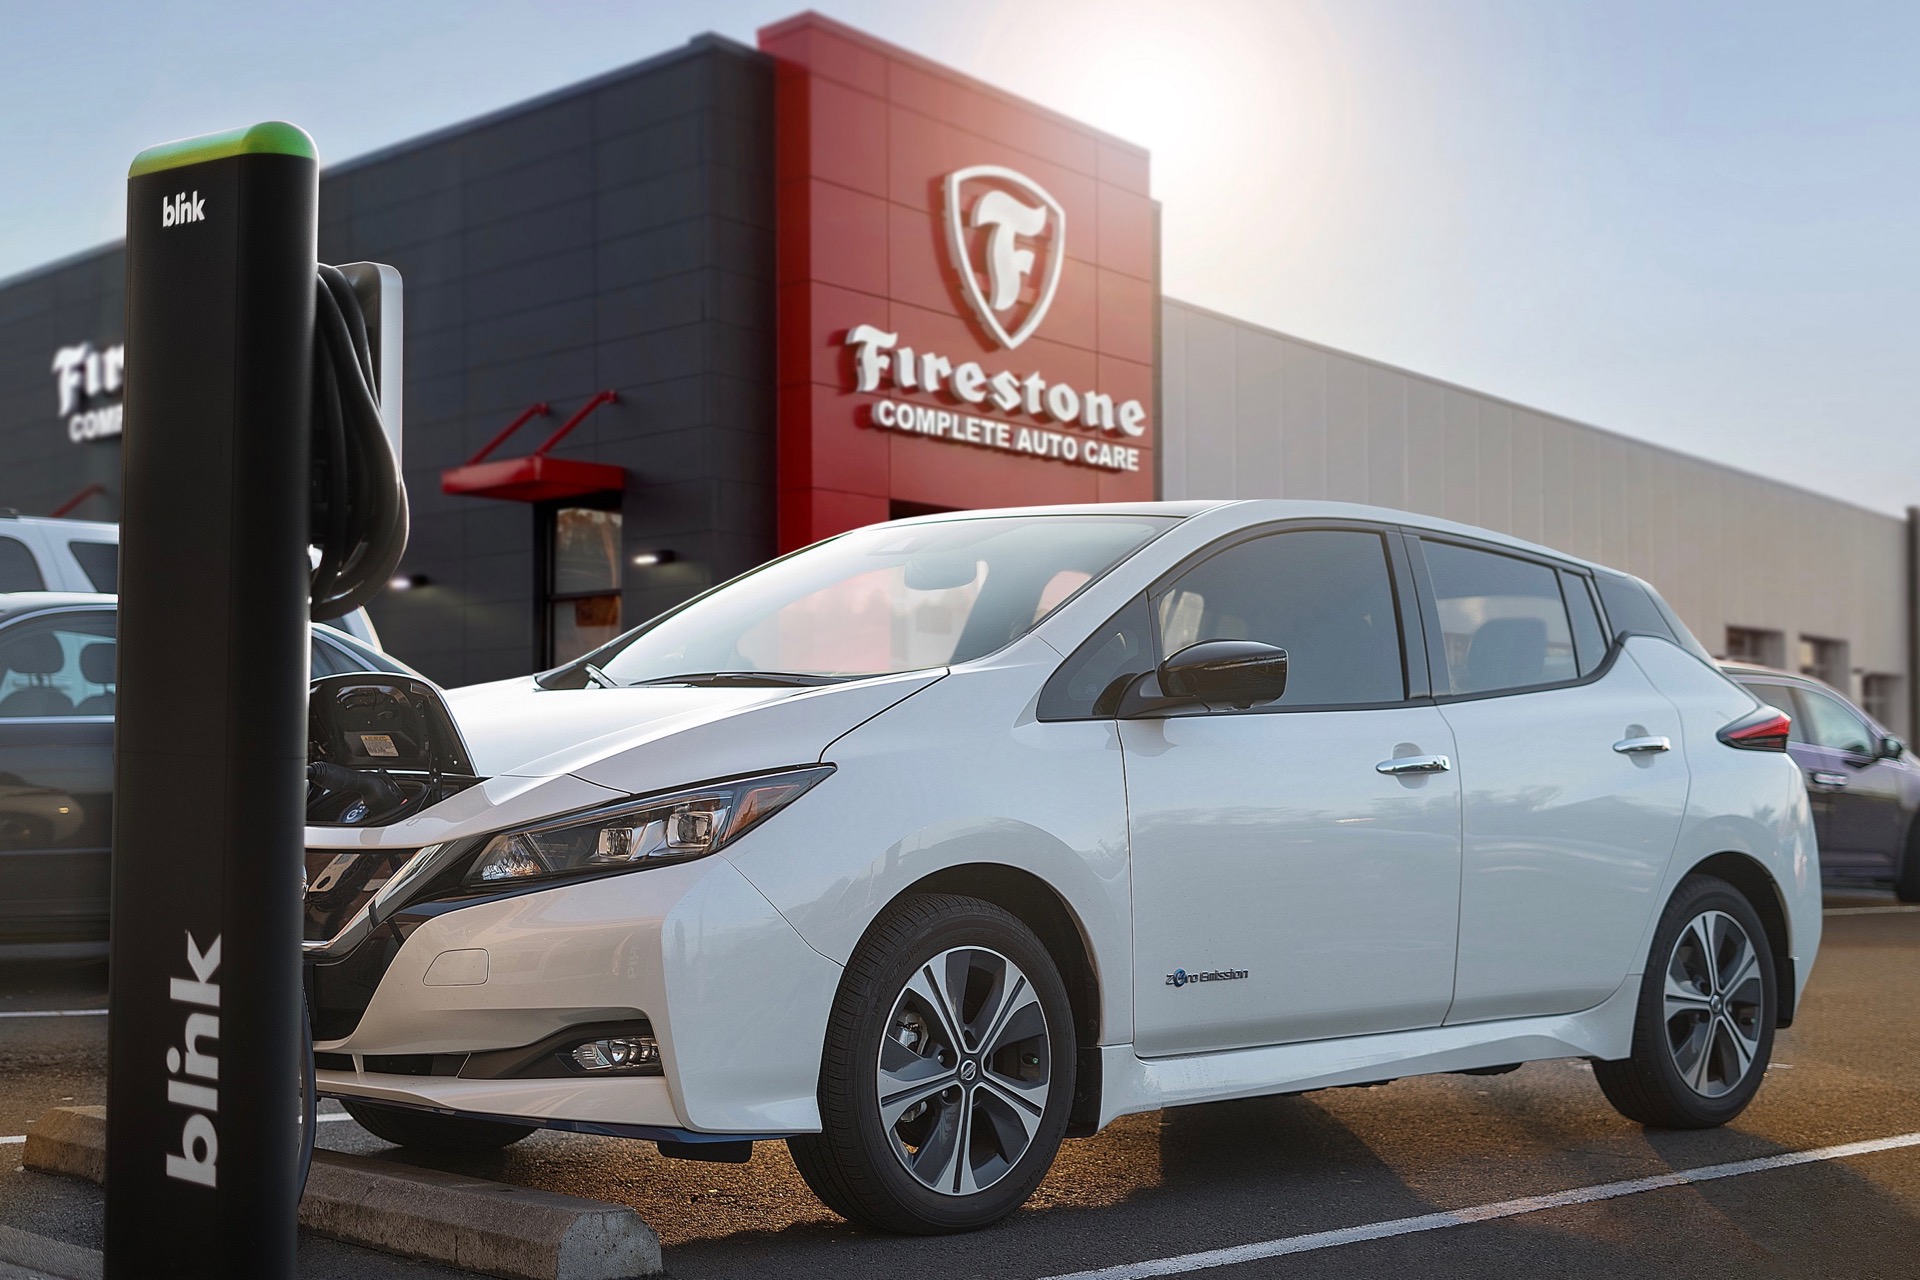 Firestone stores are vying for EV and hybrid customers, adding chargingFirestone stores are vying for EV and hybrid customers, adding charging